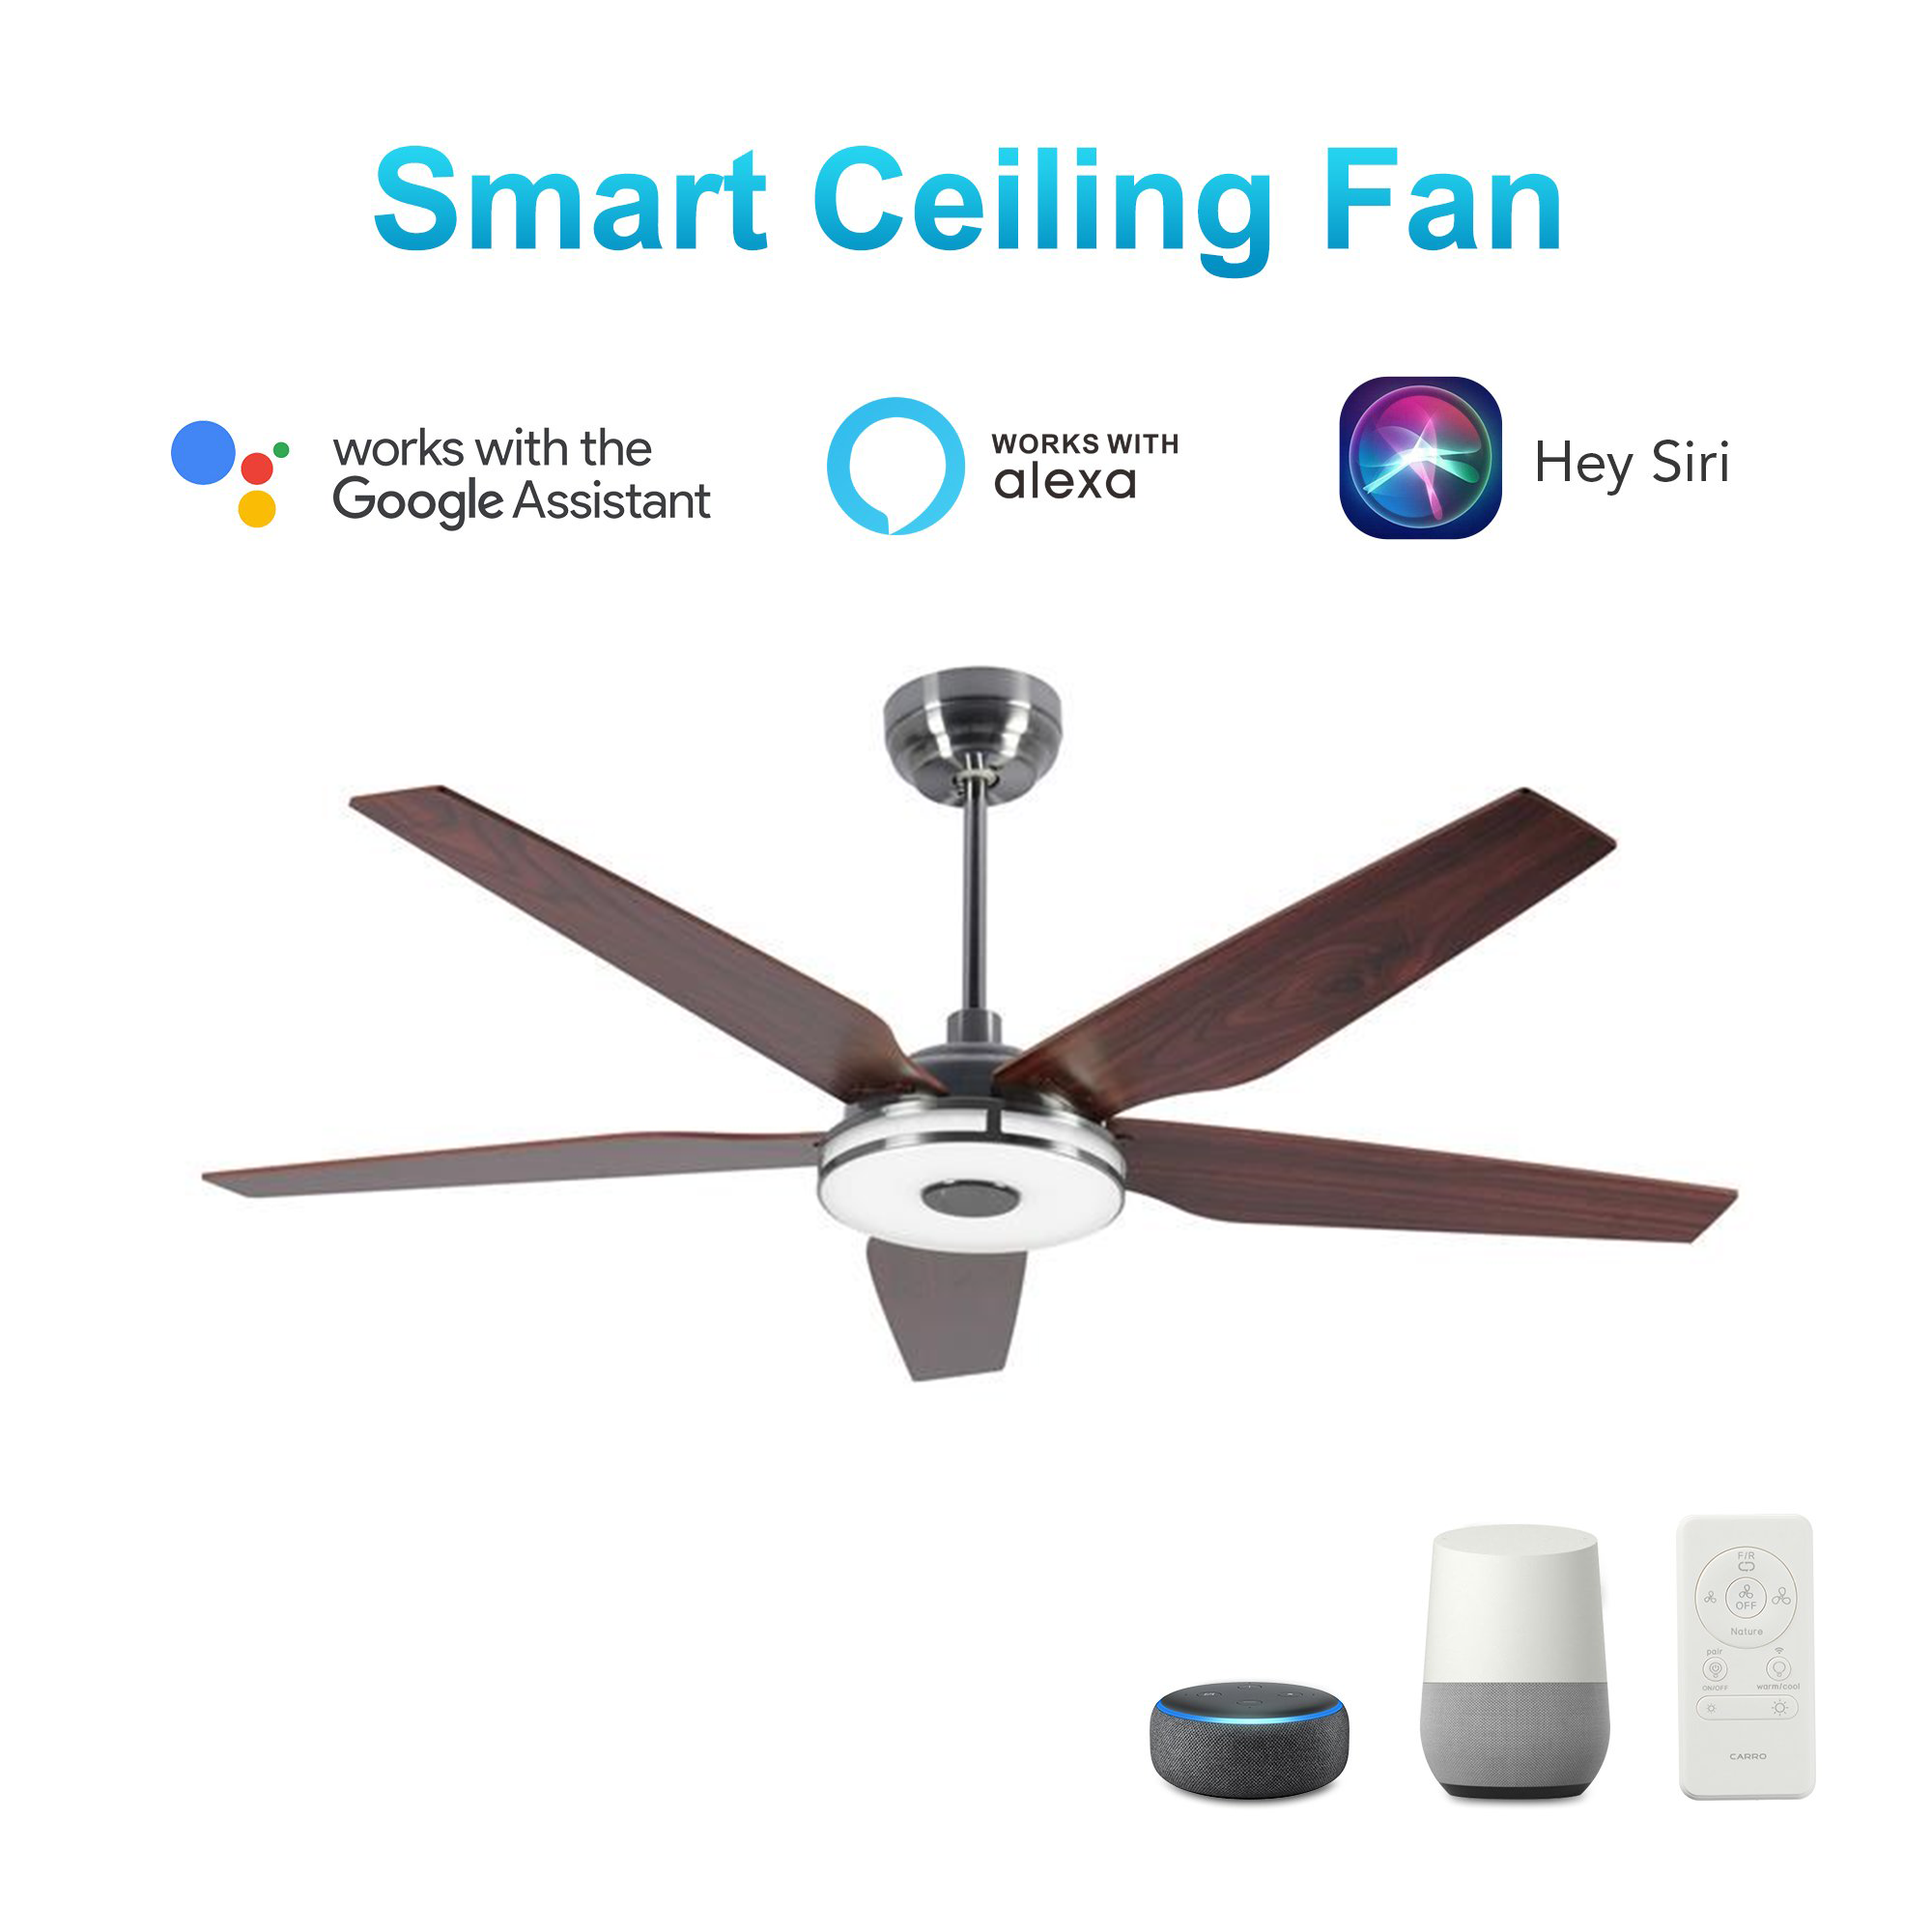 Explorer 56" In. Silver/Wood 5 Blade Smart Ceiling Fan with Dimmable LED Light Kit Works with Remote Control, Wi-Fi apps and Voice control via Google Assistant/Alexa/Siri